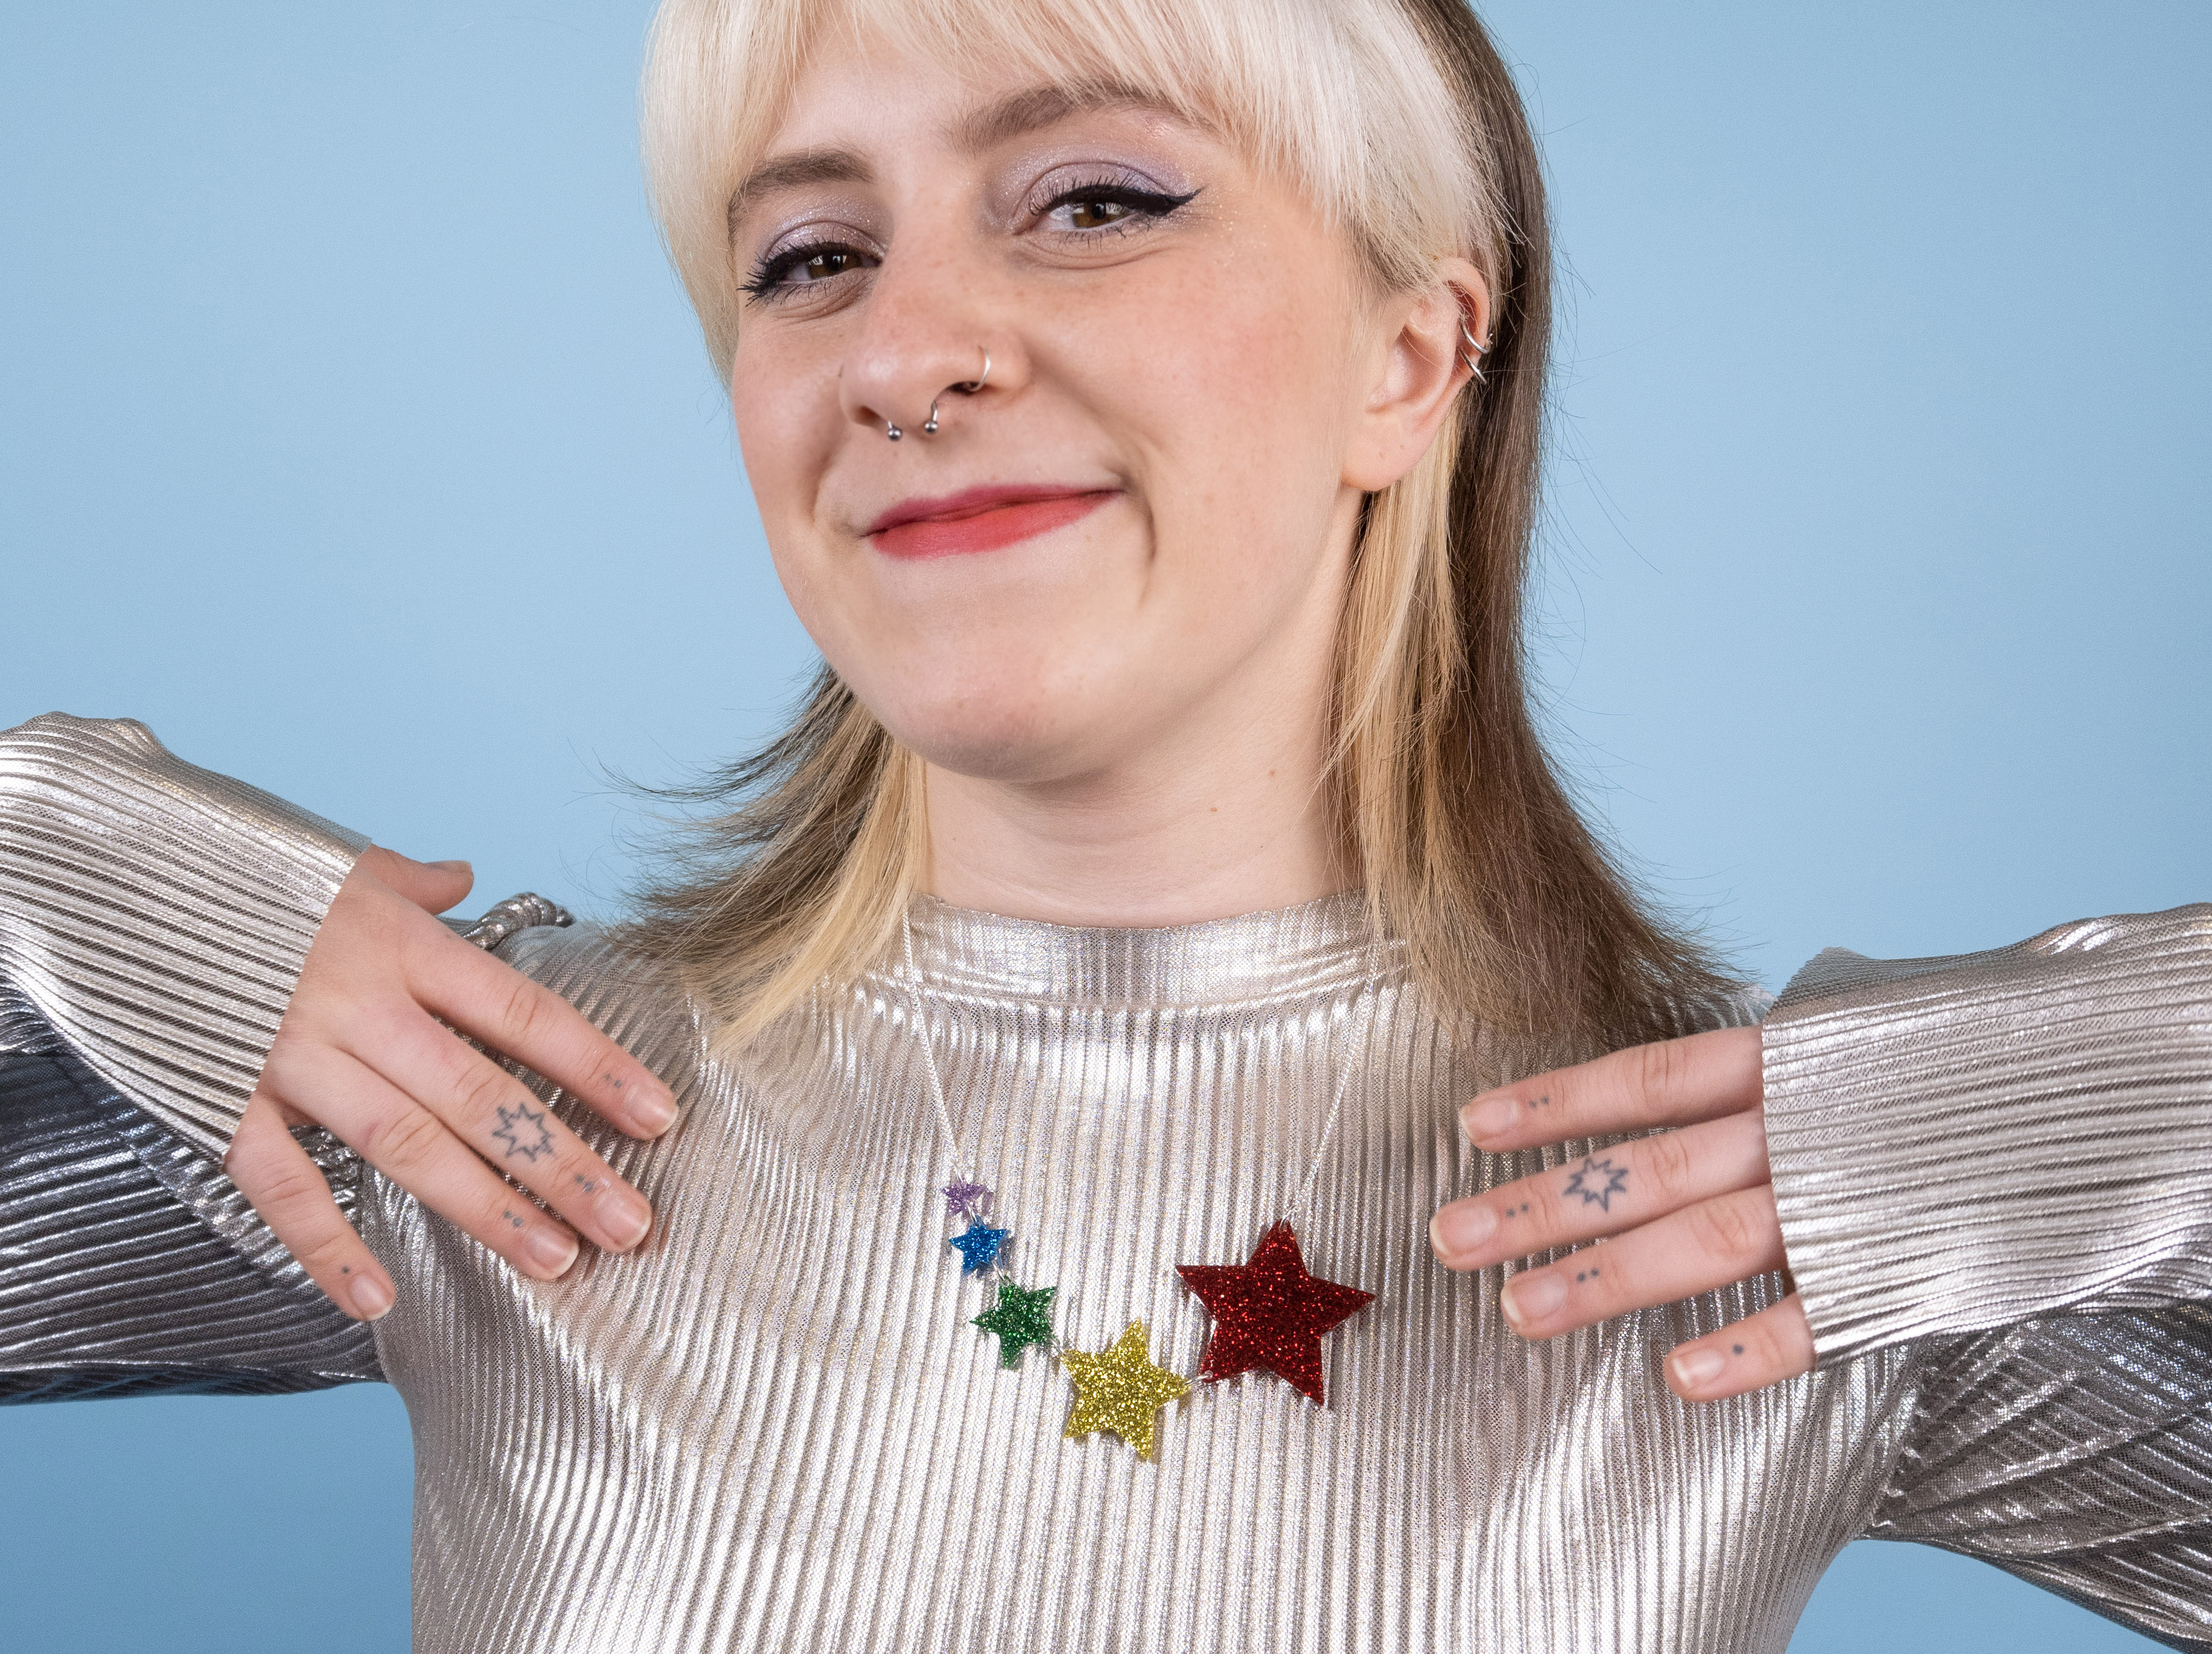 Tatty Devine’s shooting star necklace, consisting of five stars of different colours